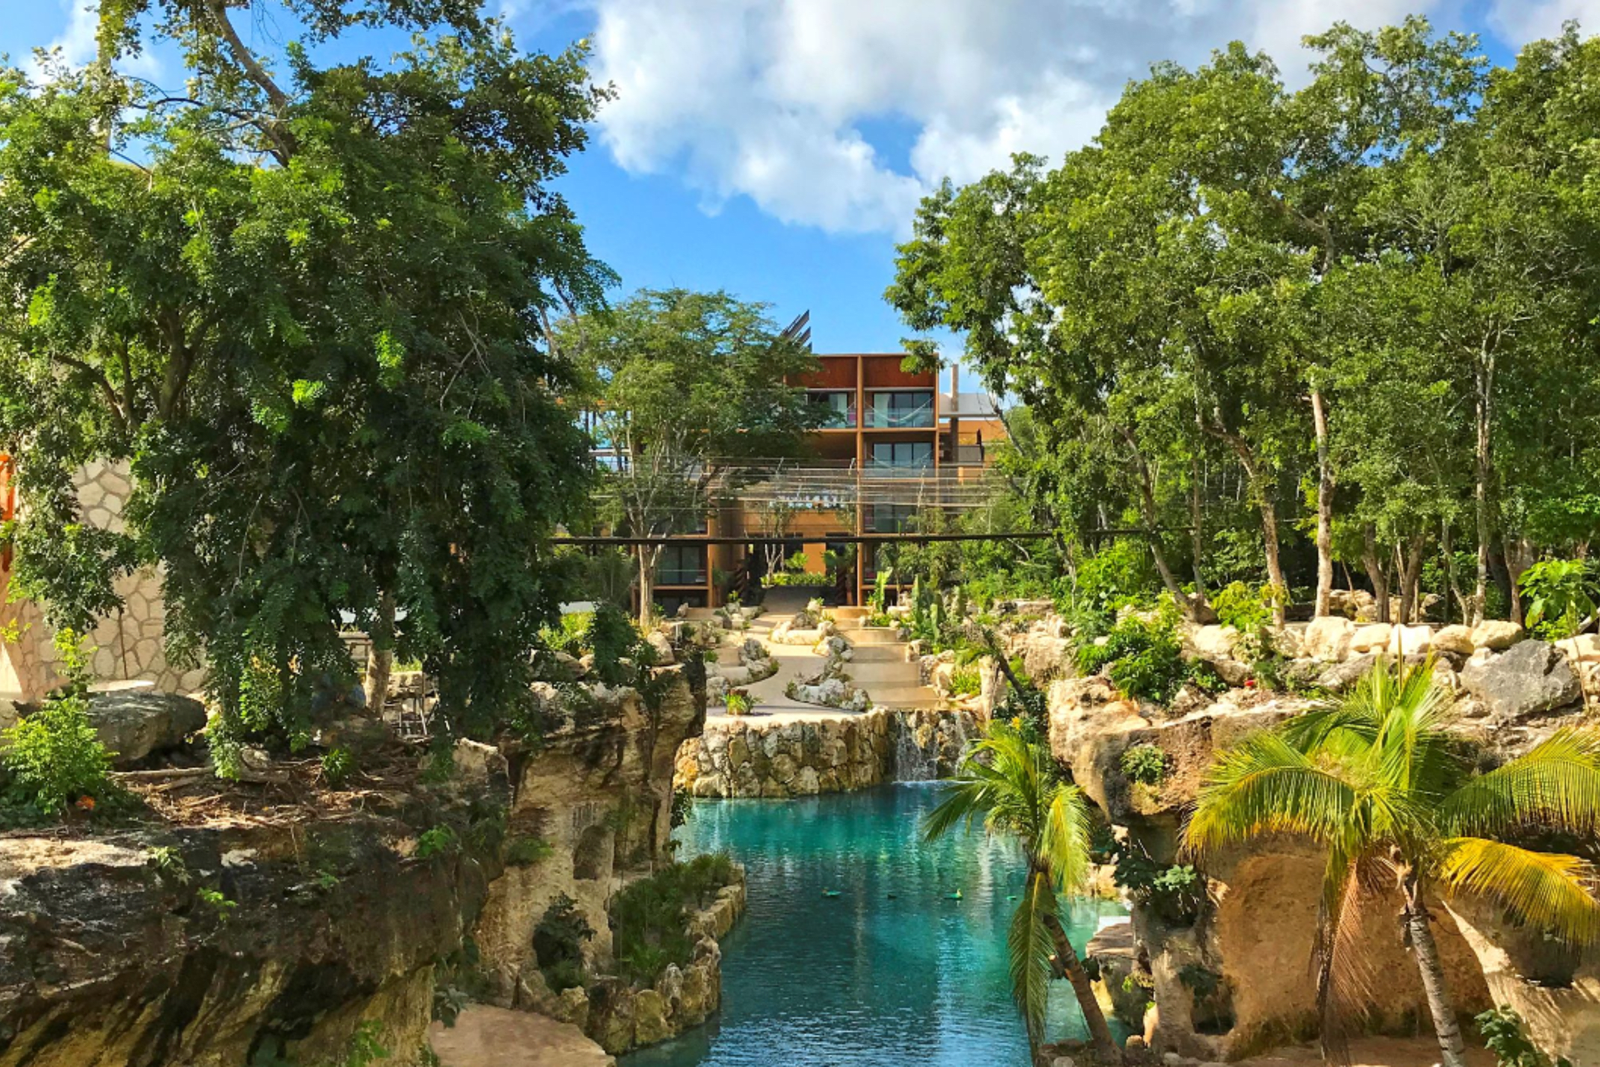 Every room at Hotel Xcaret México has a spectacular view